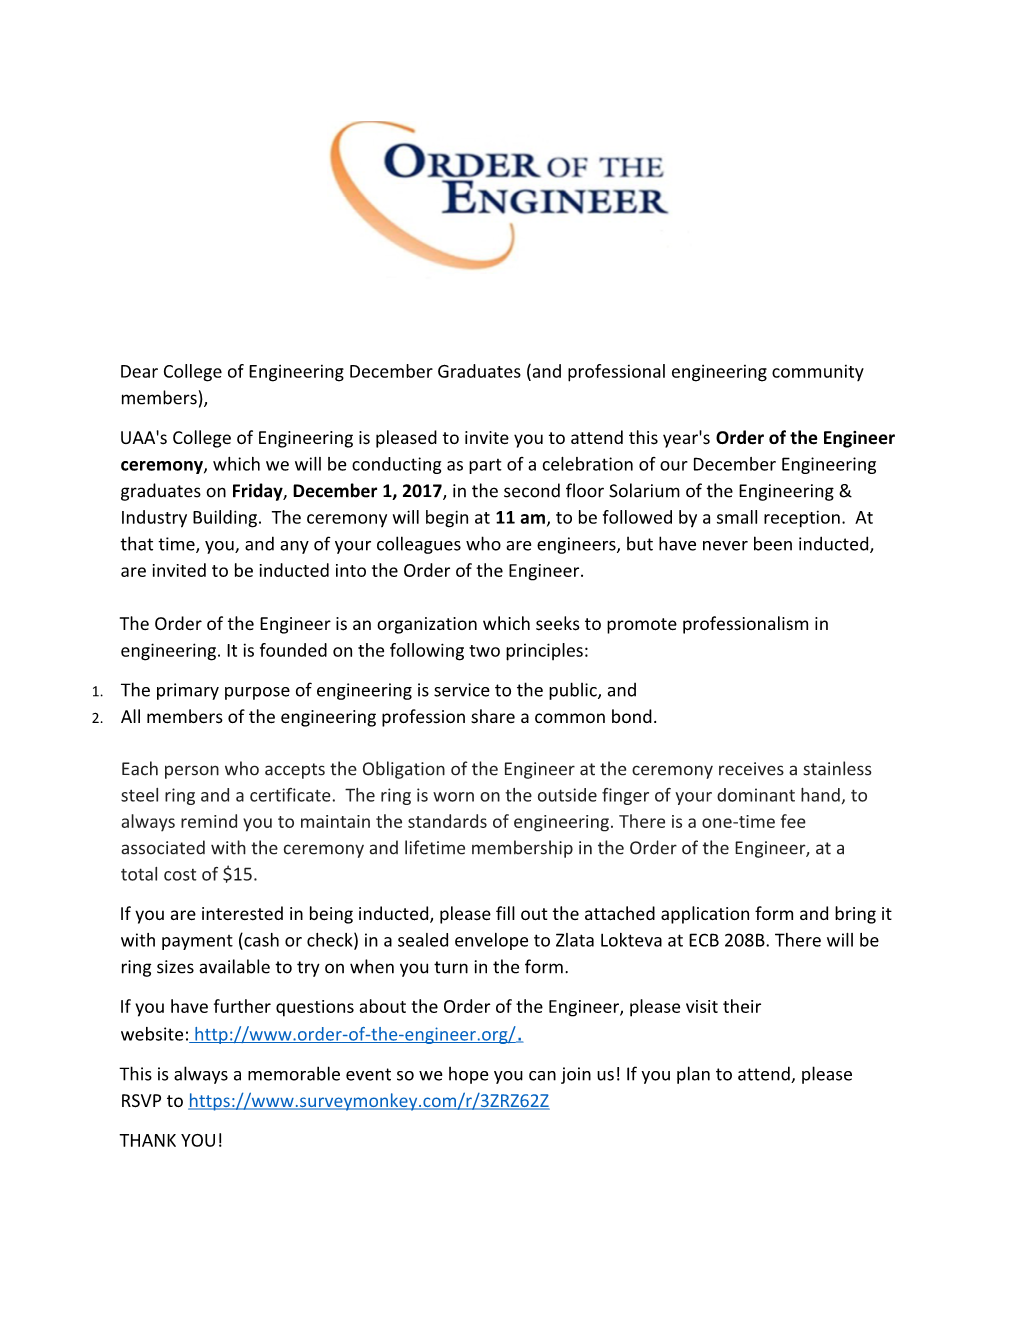 Dear College of Engineering December Graduates (And Professional Engineering Community Members)